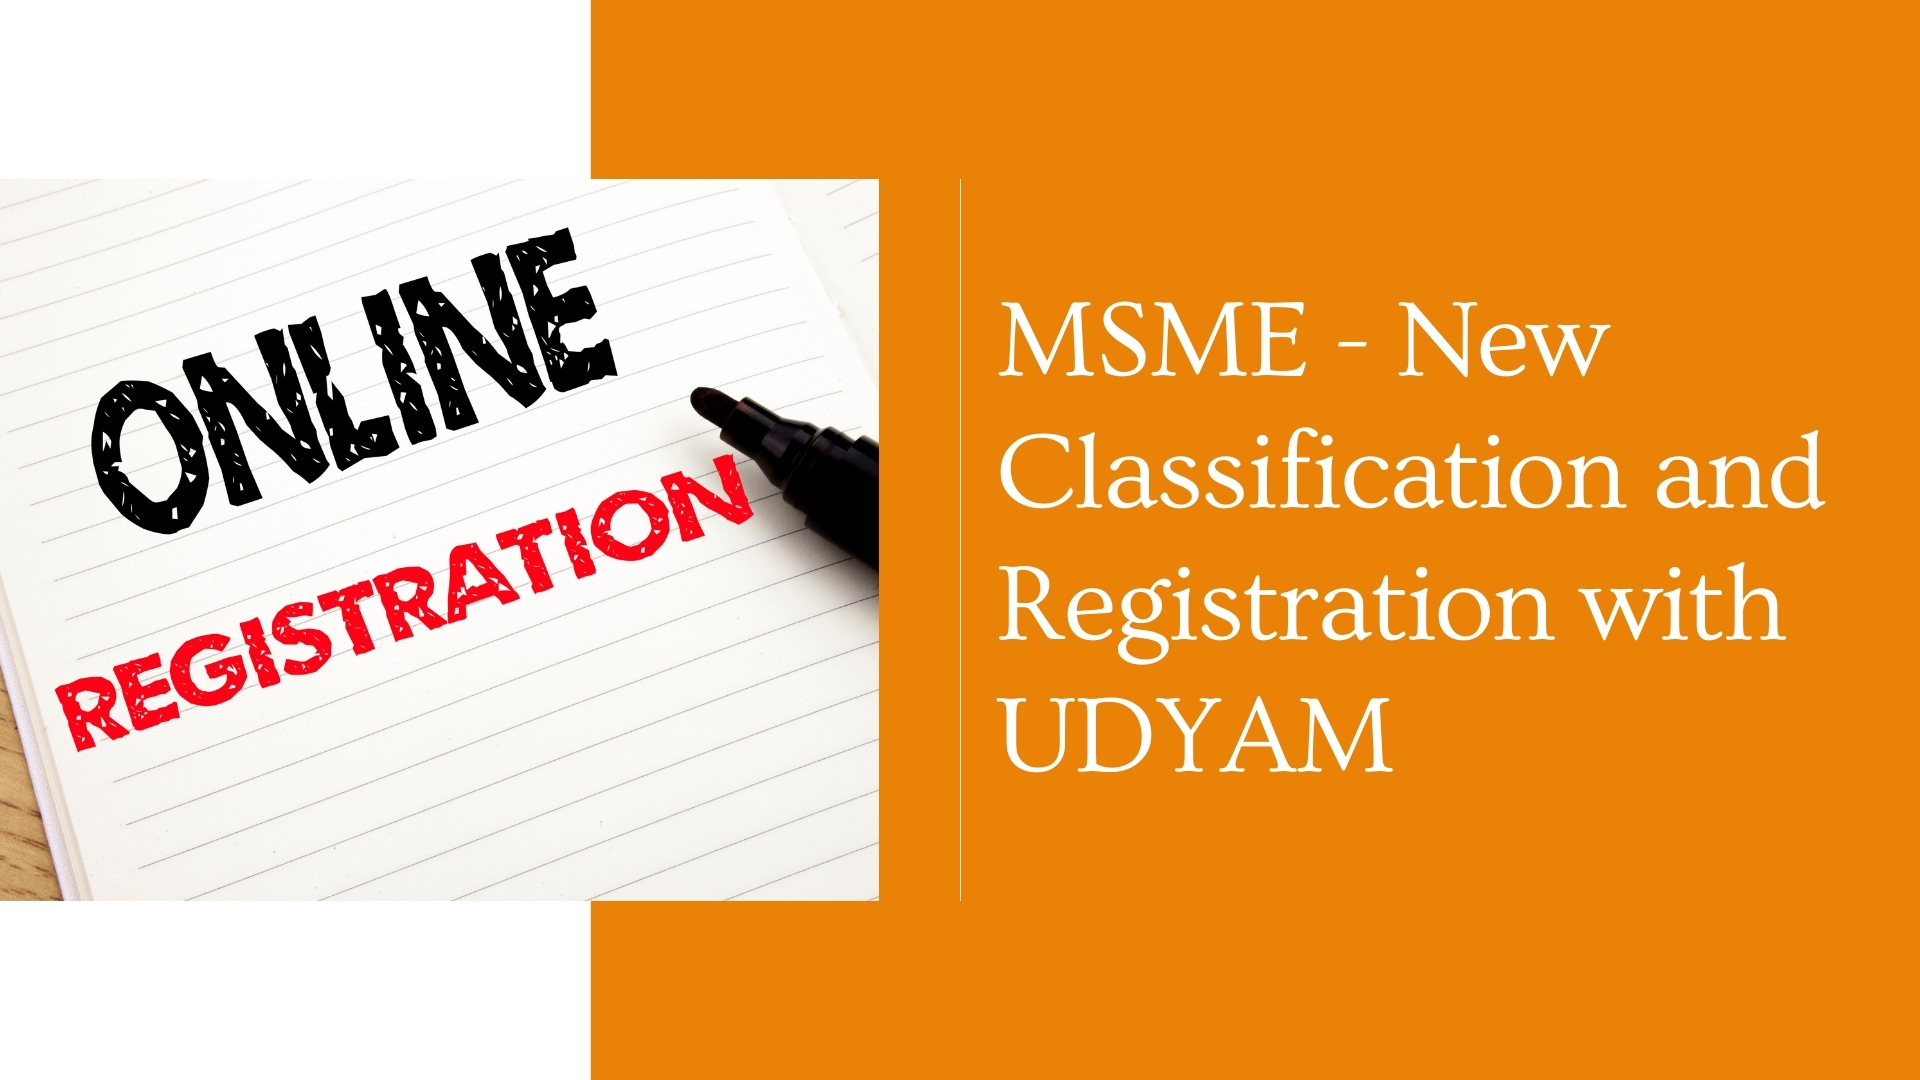 MSME – New Classification and Registration with UDYAM